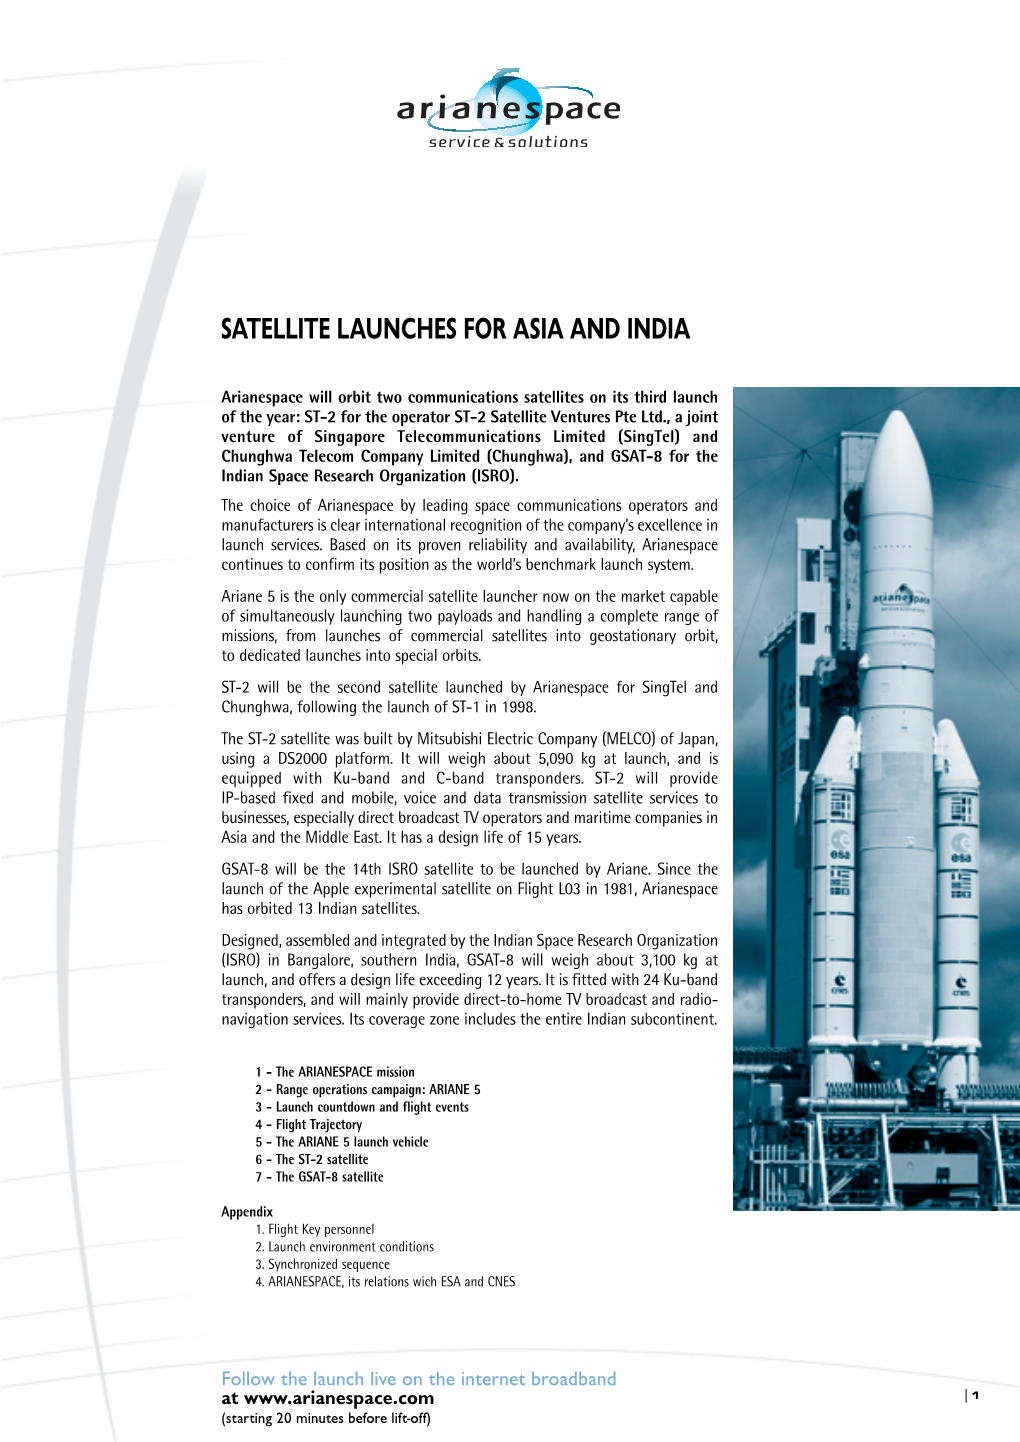 Satellite Launches for Asia and India